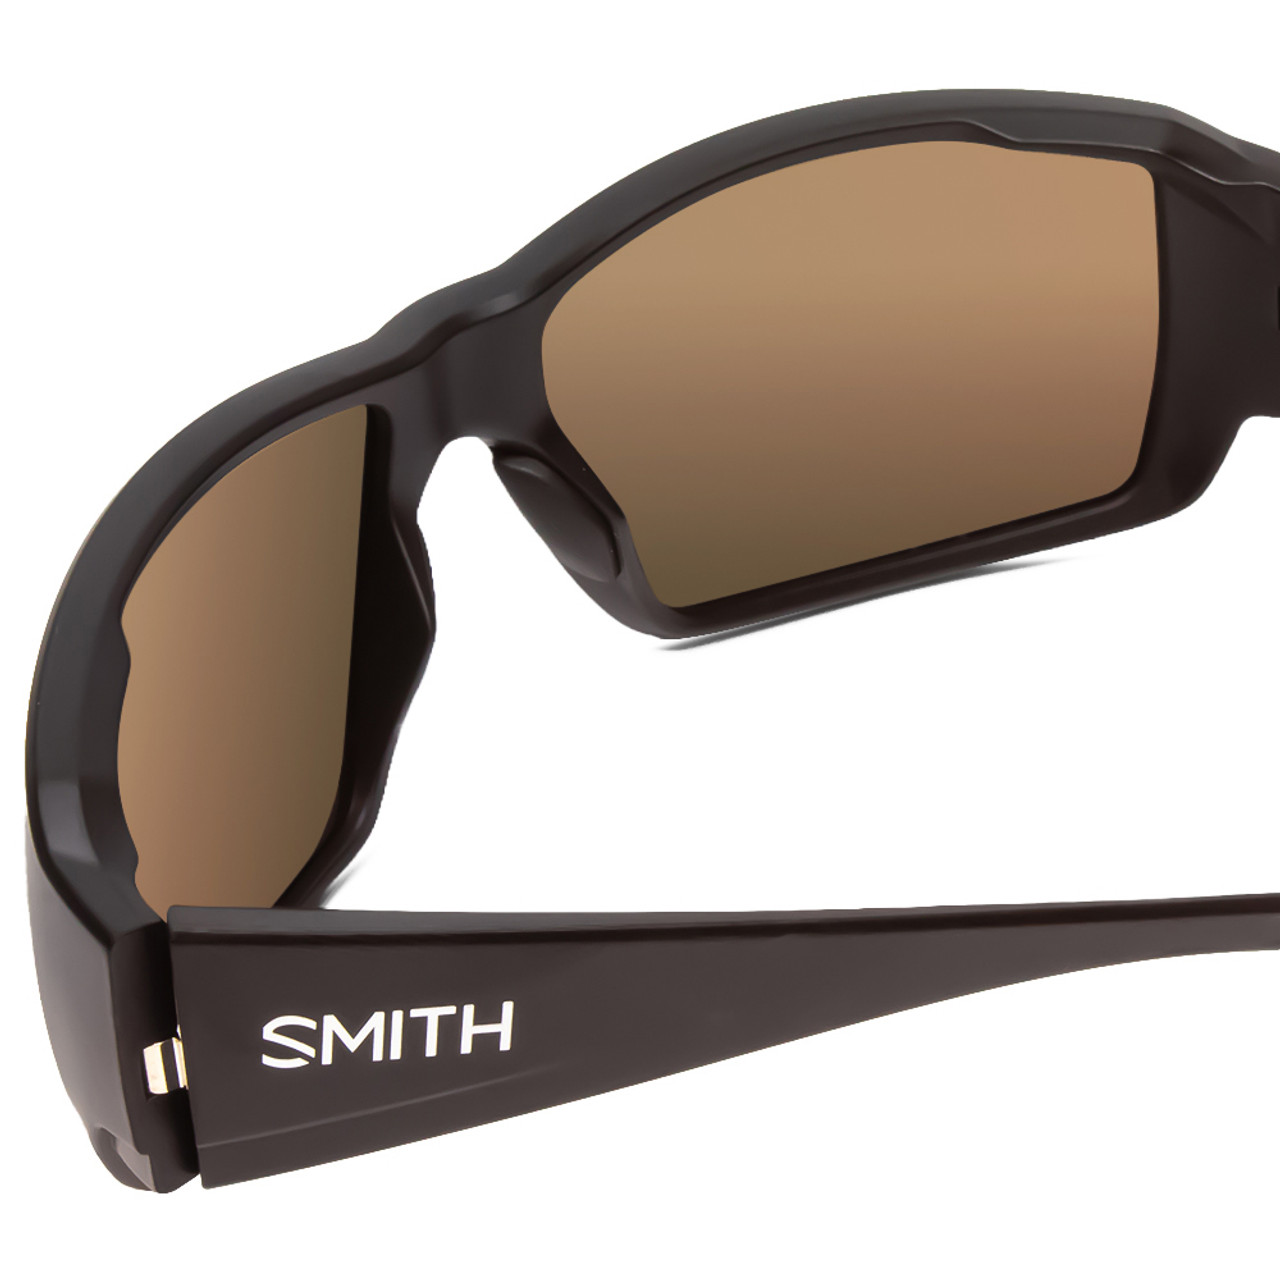 Close Up View of Smith Guides Choice Unisex Sunglasses Black /ChromaPop Polarized Gray Green 62mm